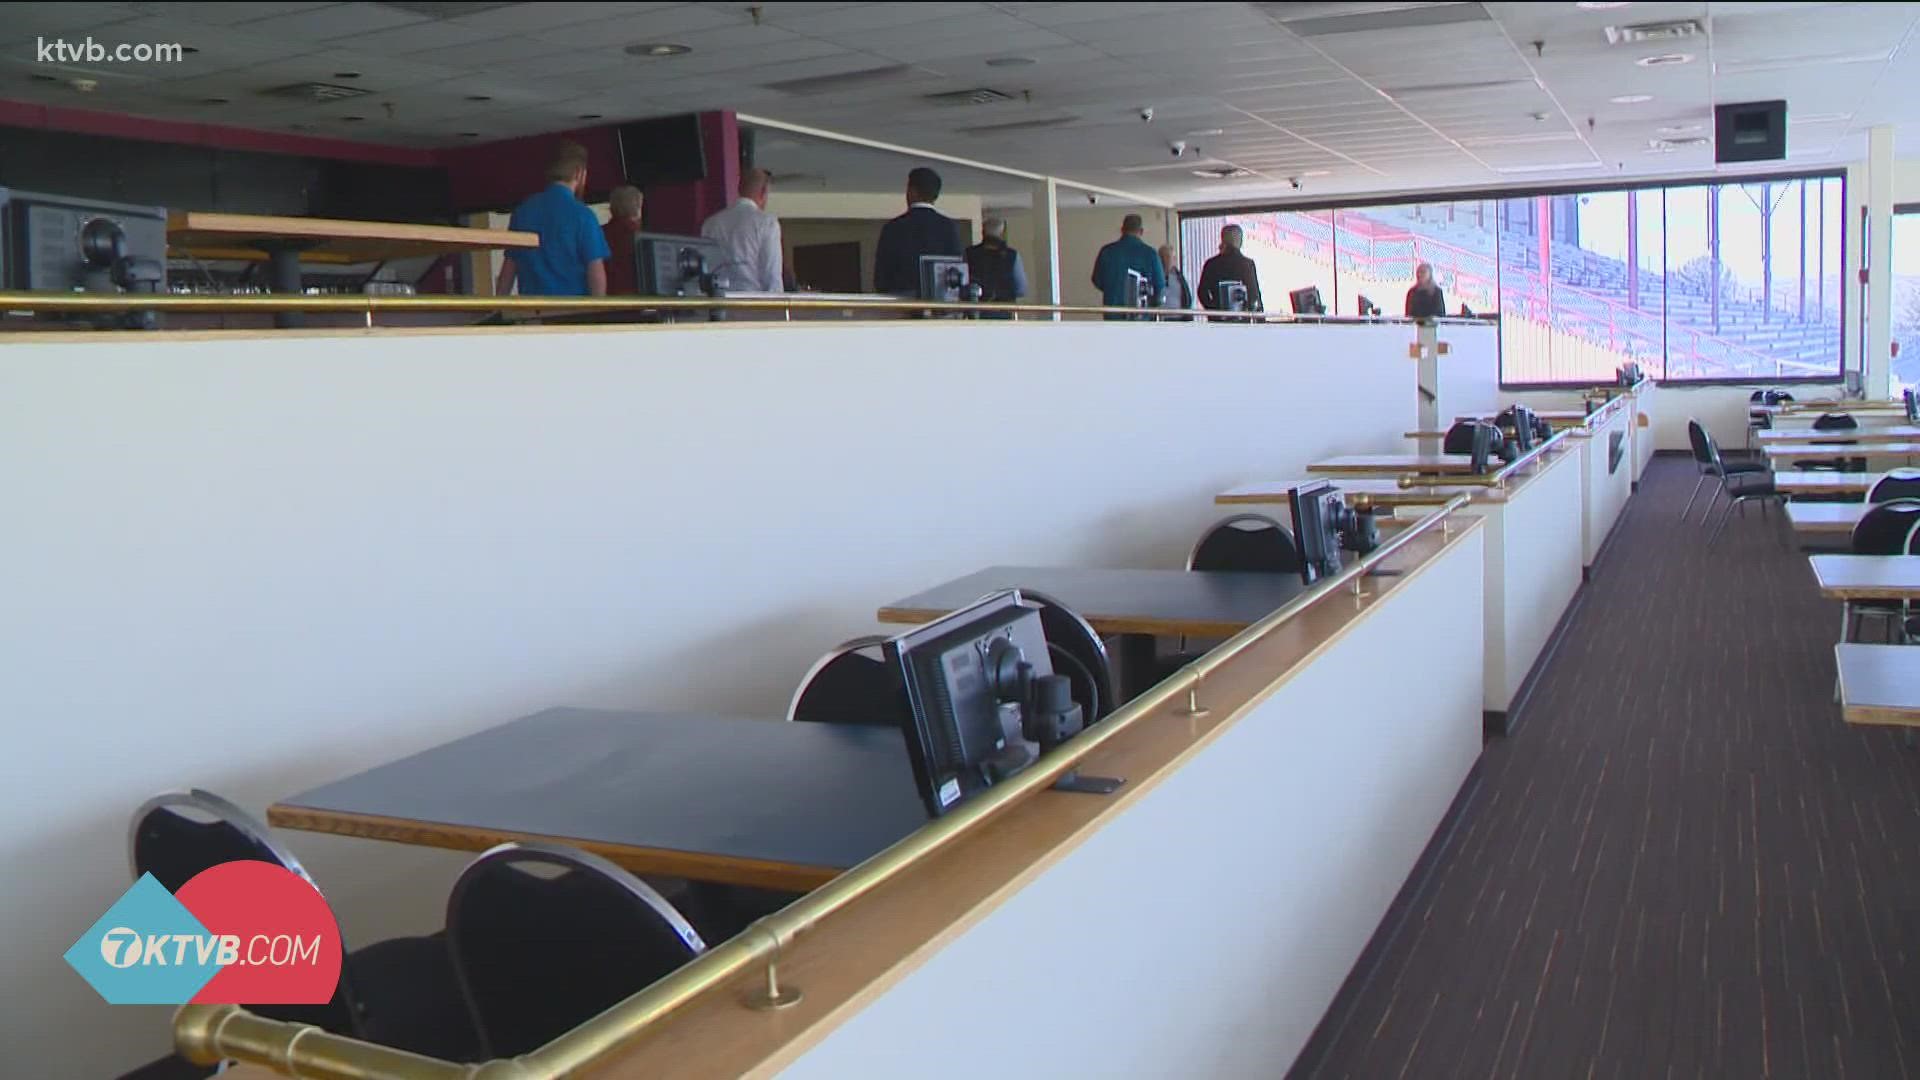 Ada County is looking to bring the two-level, 12,495 square-foot facility back to life at Les Bois Park. On Wednesday, potential leasers toured the Turf Club.